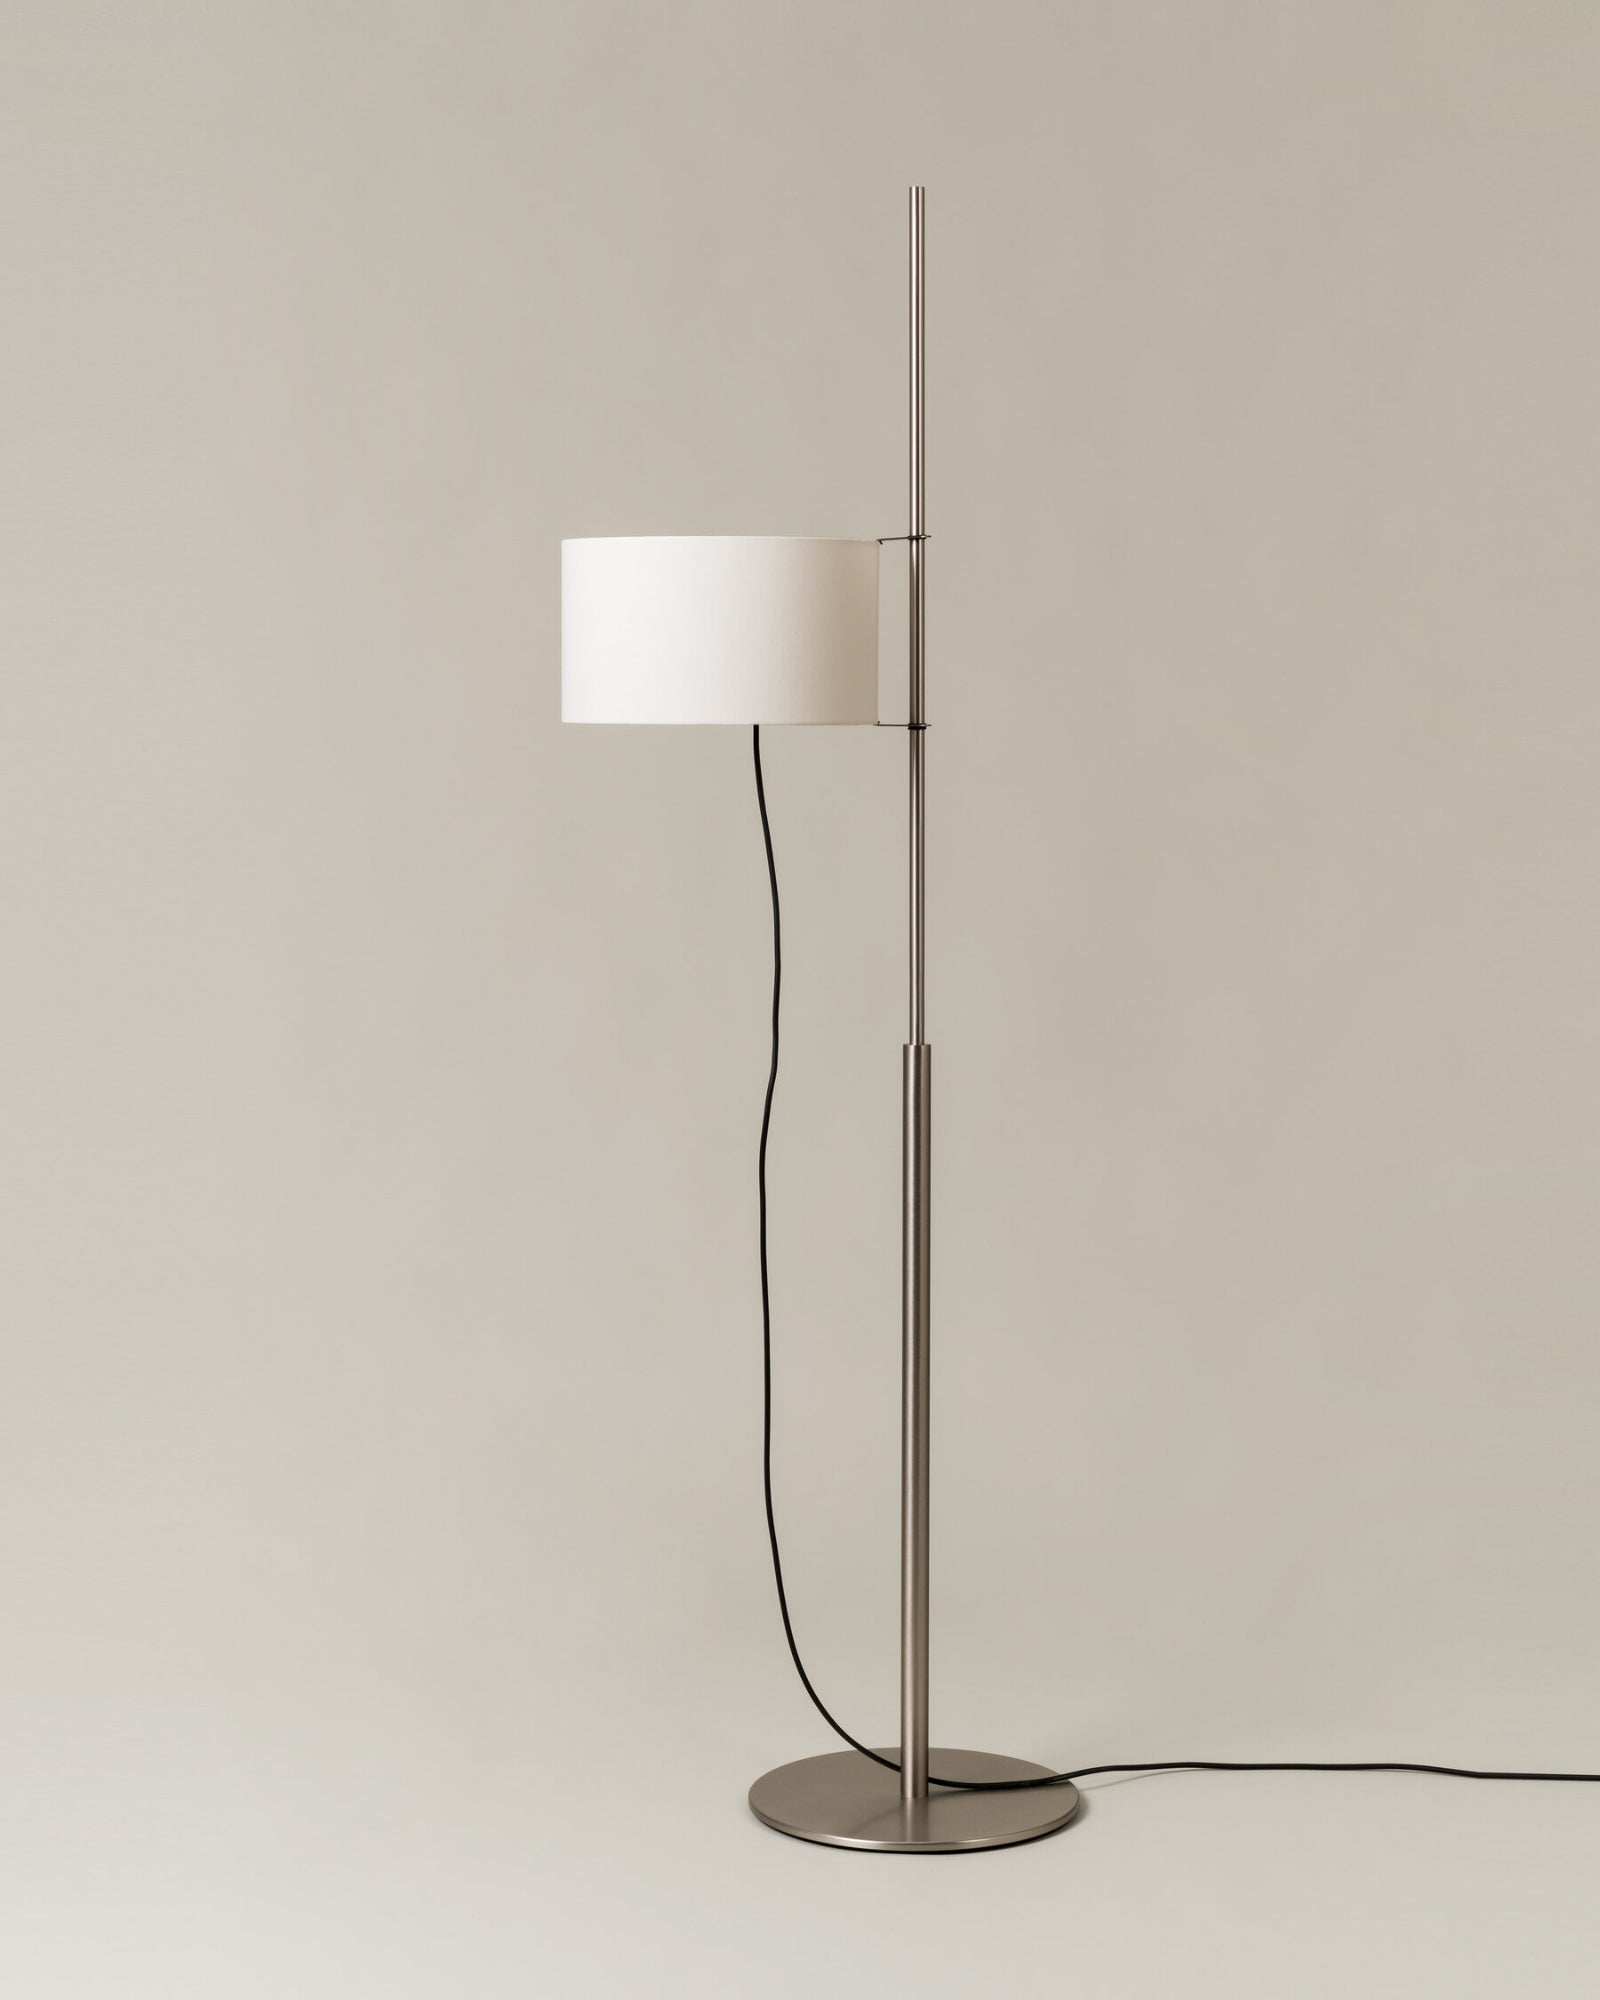 Shop TMD Floor Lamp by Santa & Cole at Nook Collections